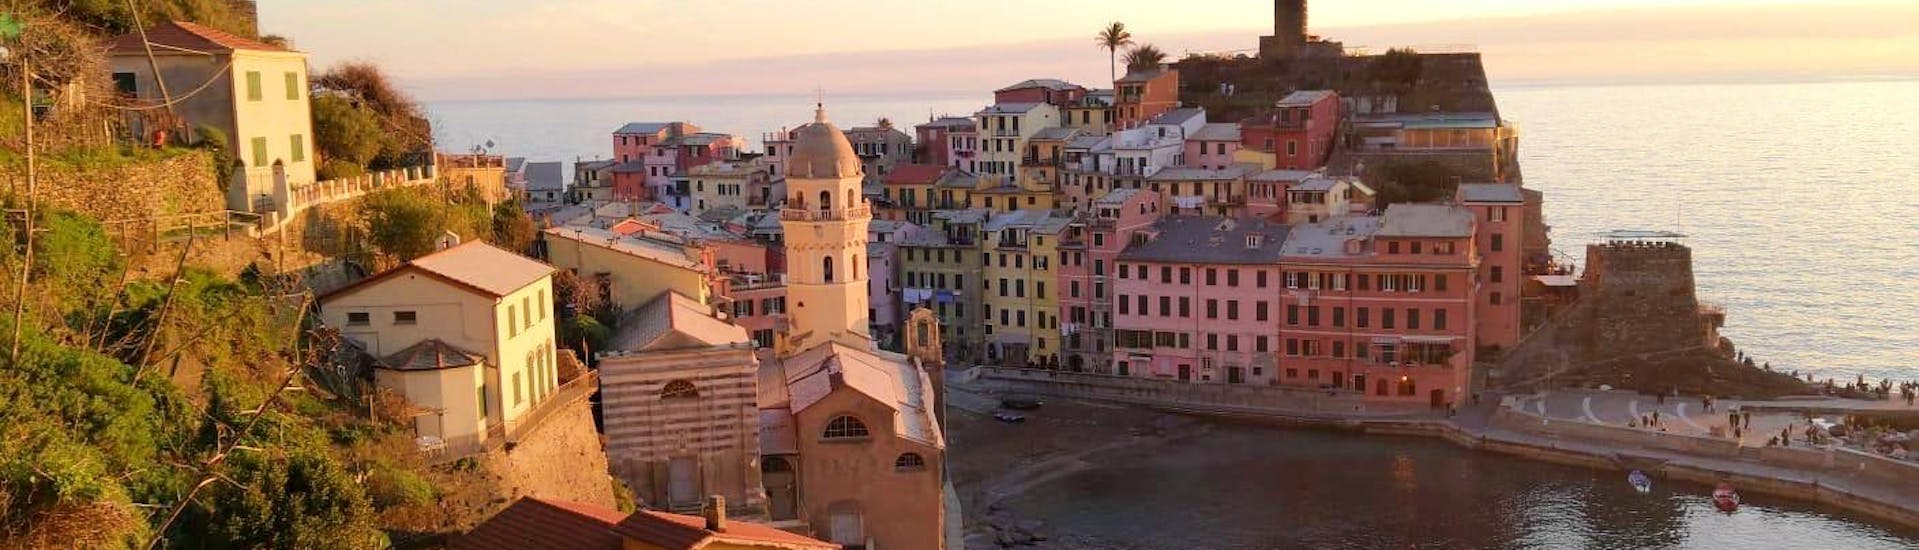 The romantic sunset that you will admire during the sunset boat trip to Cinque Terre with dinner with Fish&Chill Cinque Terre Tour. 